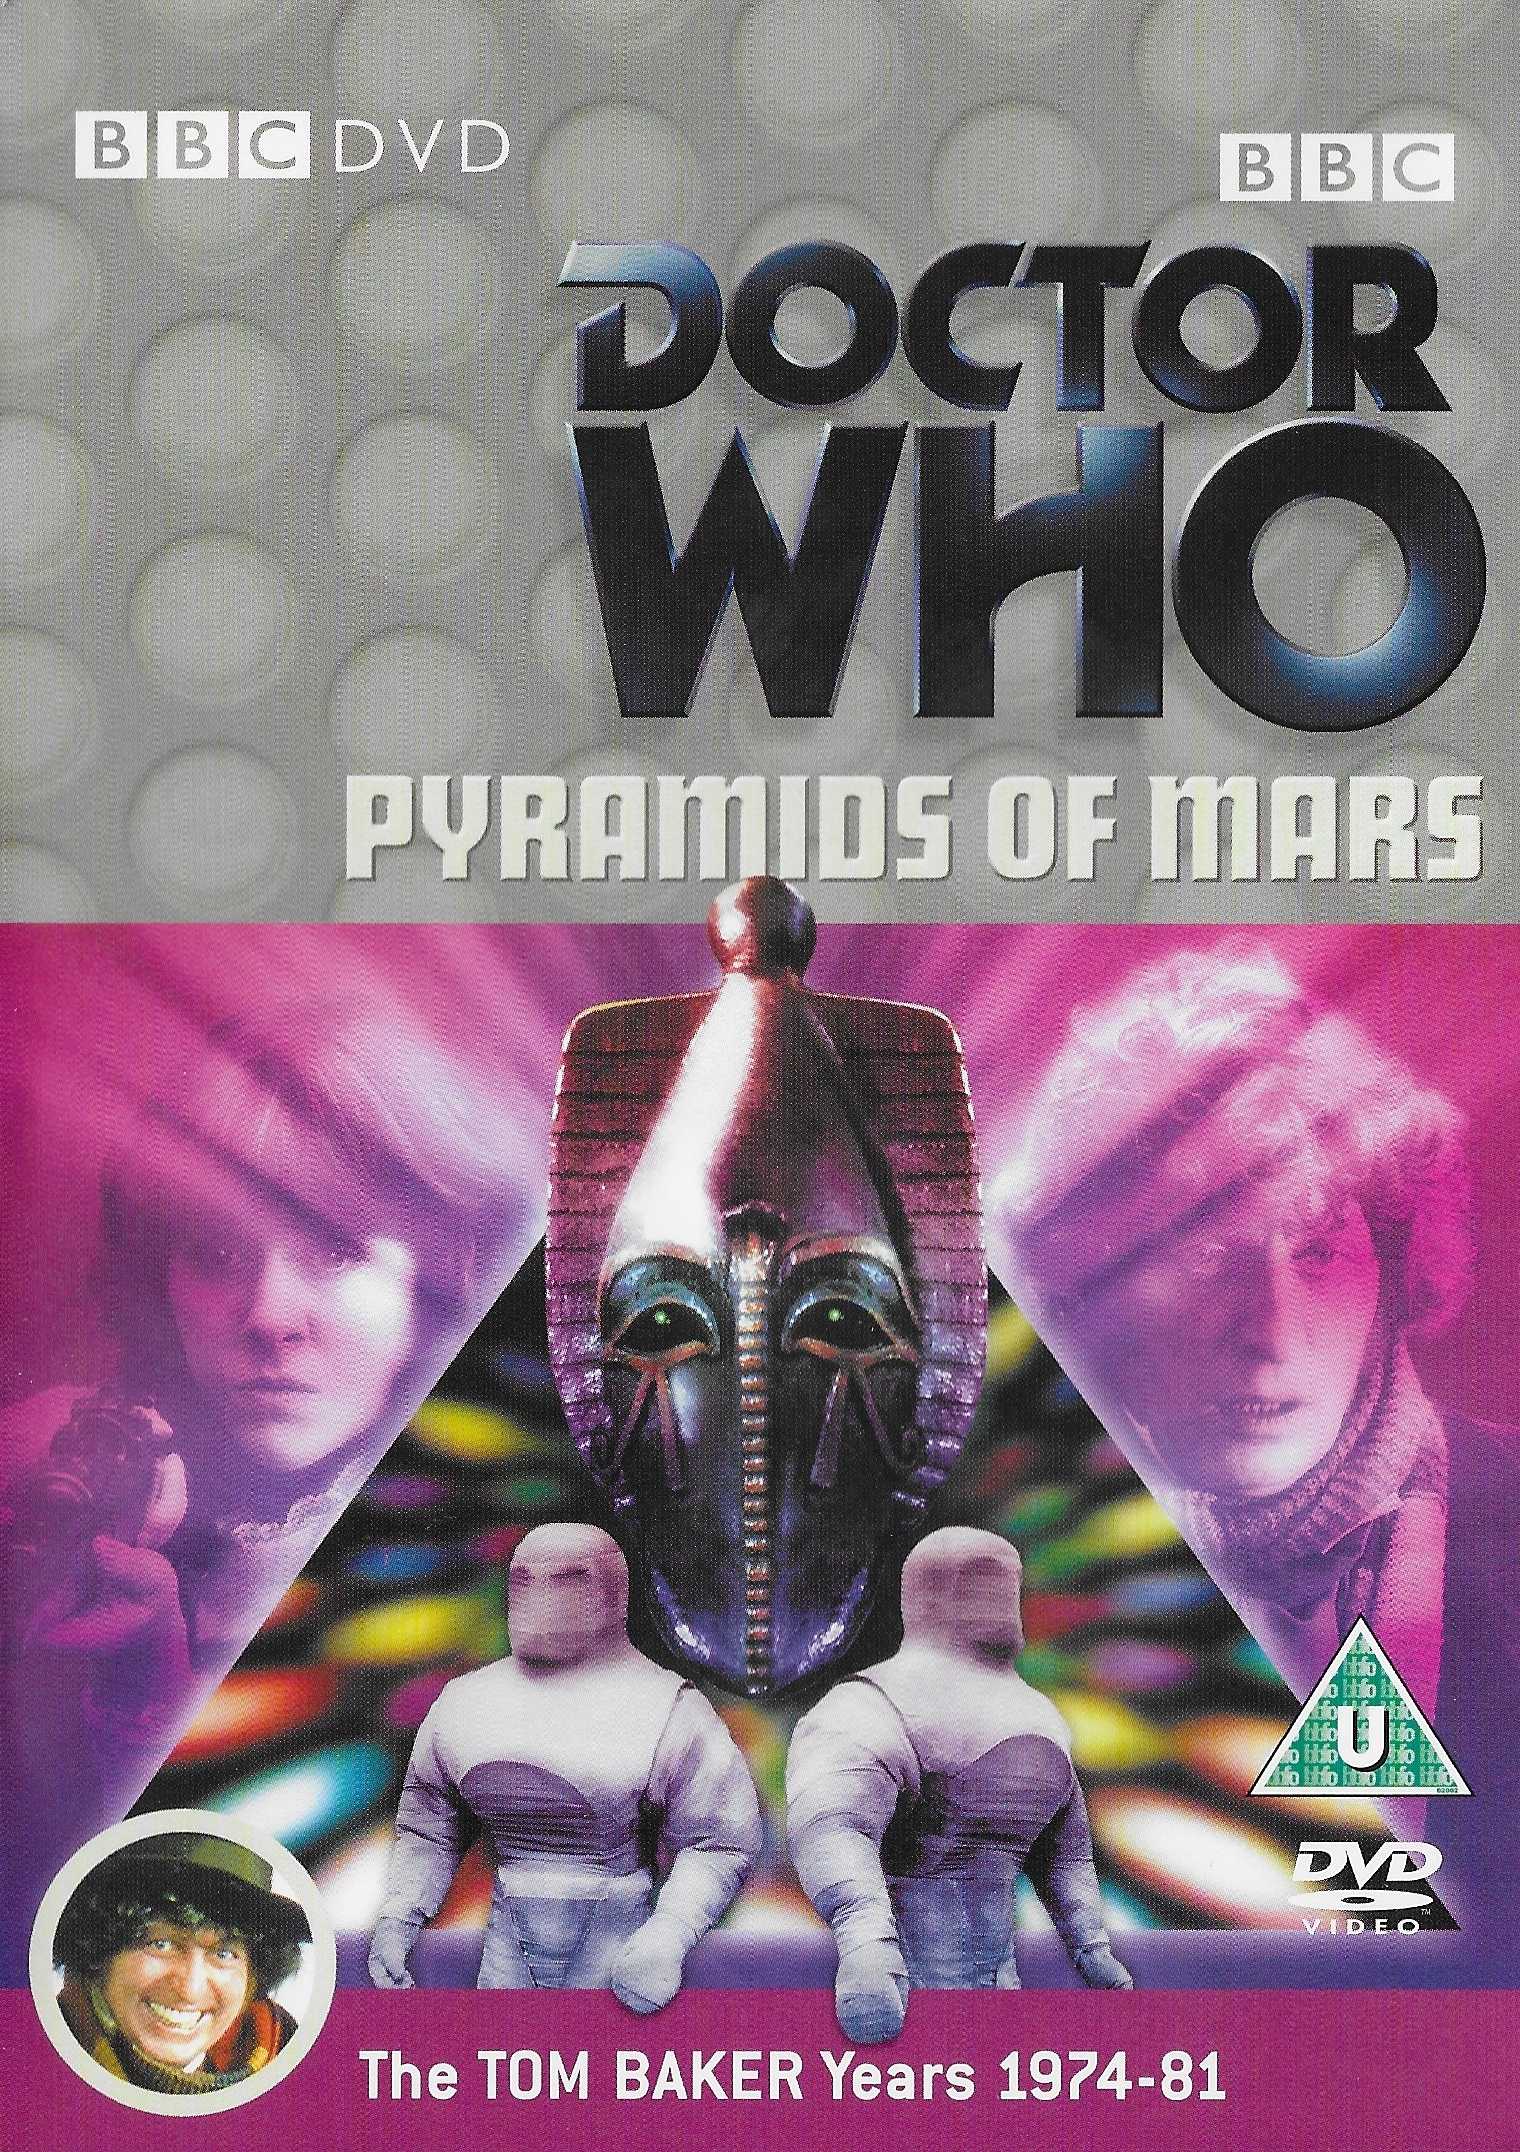 Picture of BBCDVD 1350 Doctor Who - Pyramids of Mars by artist Bob Baker / Dave Martin from the BBC records and Tapes library